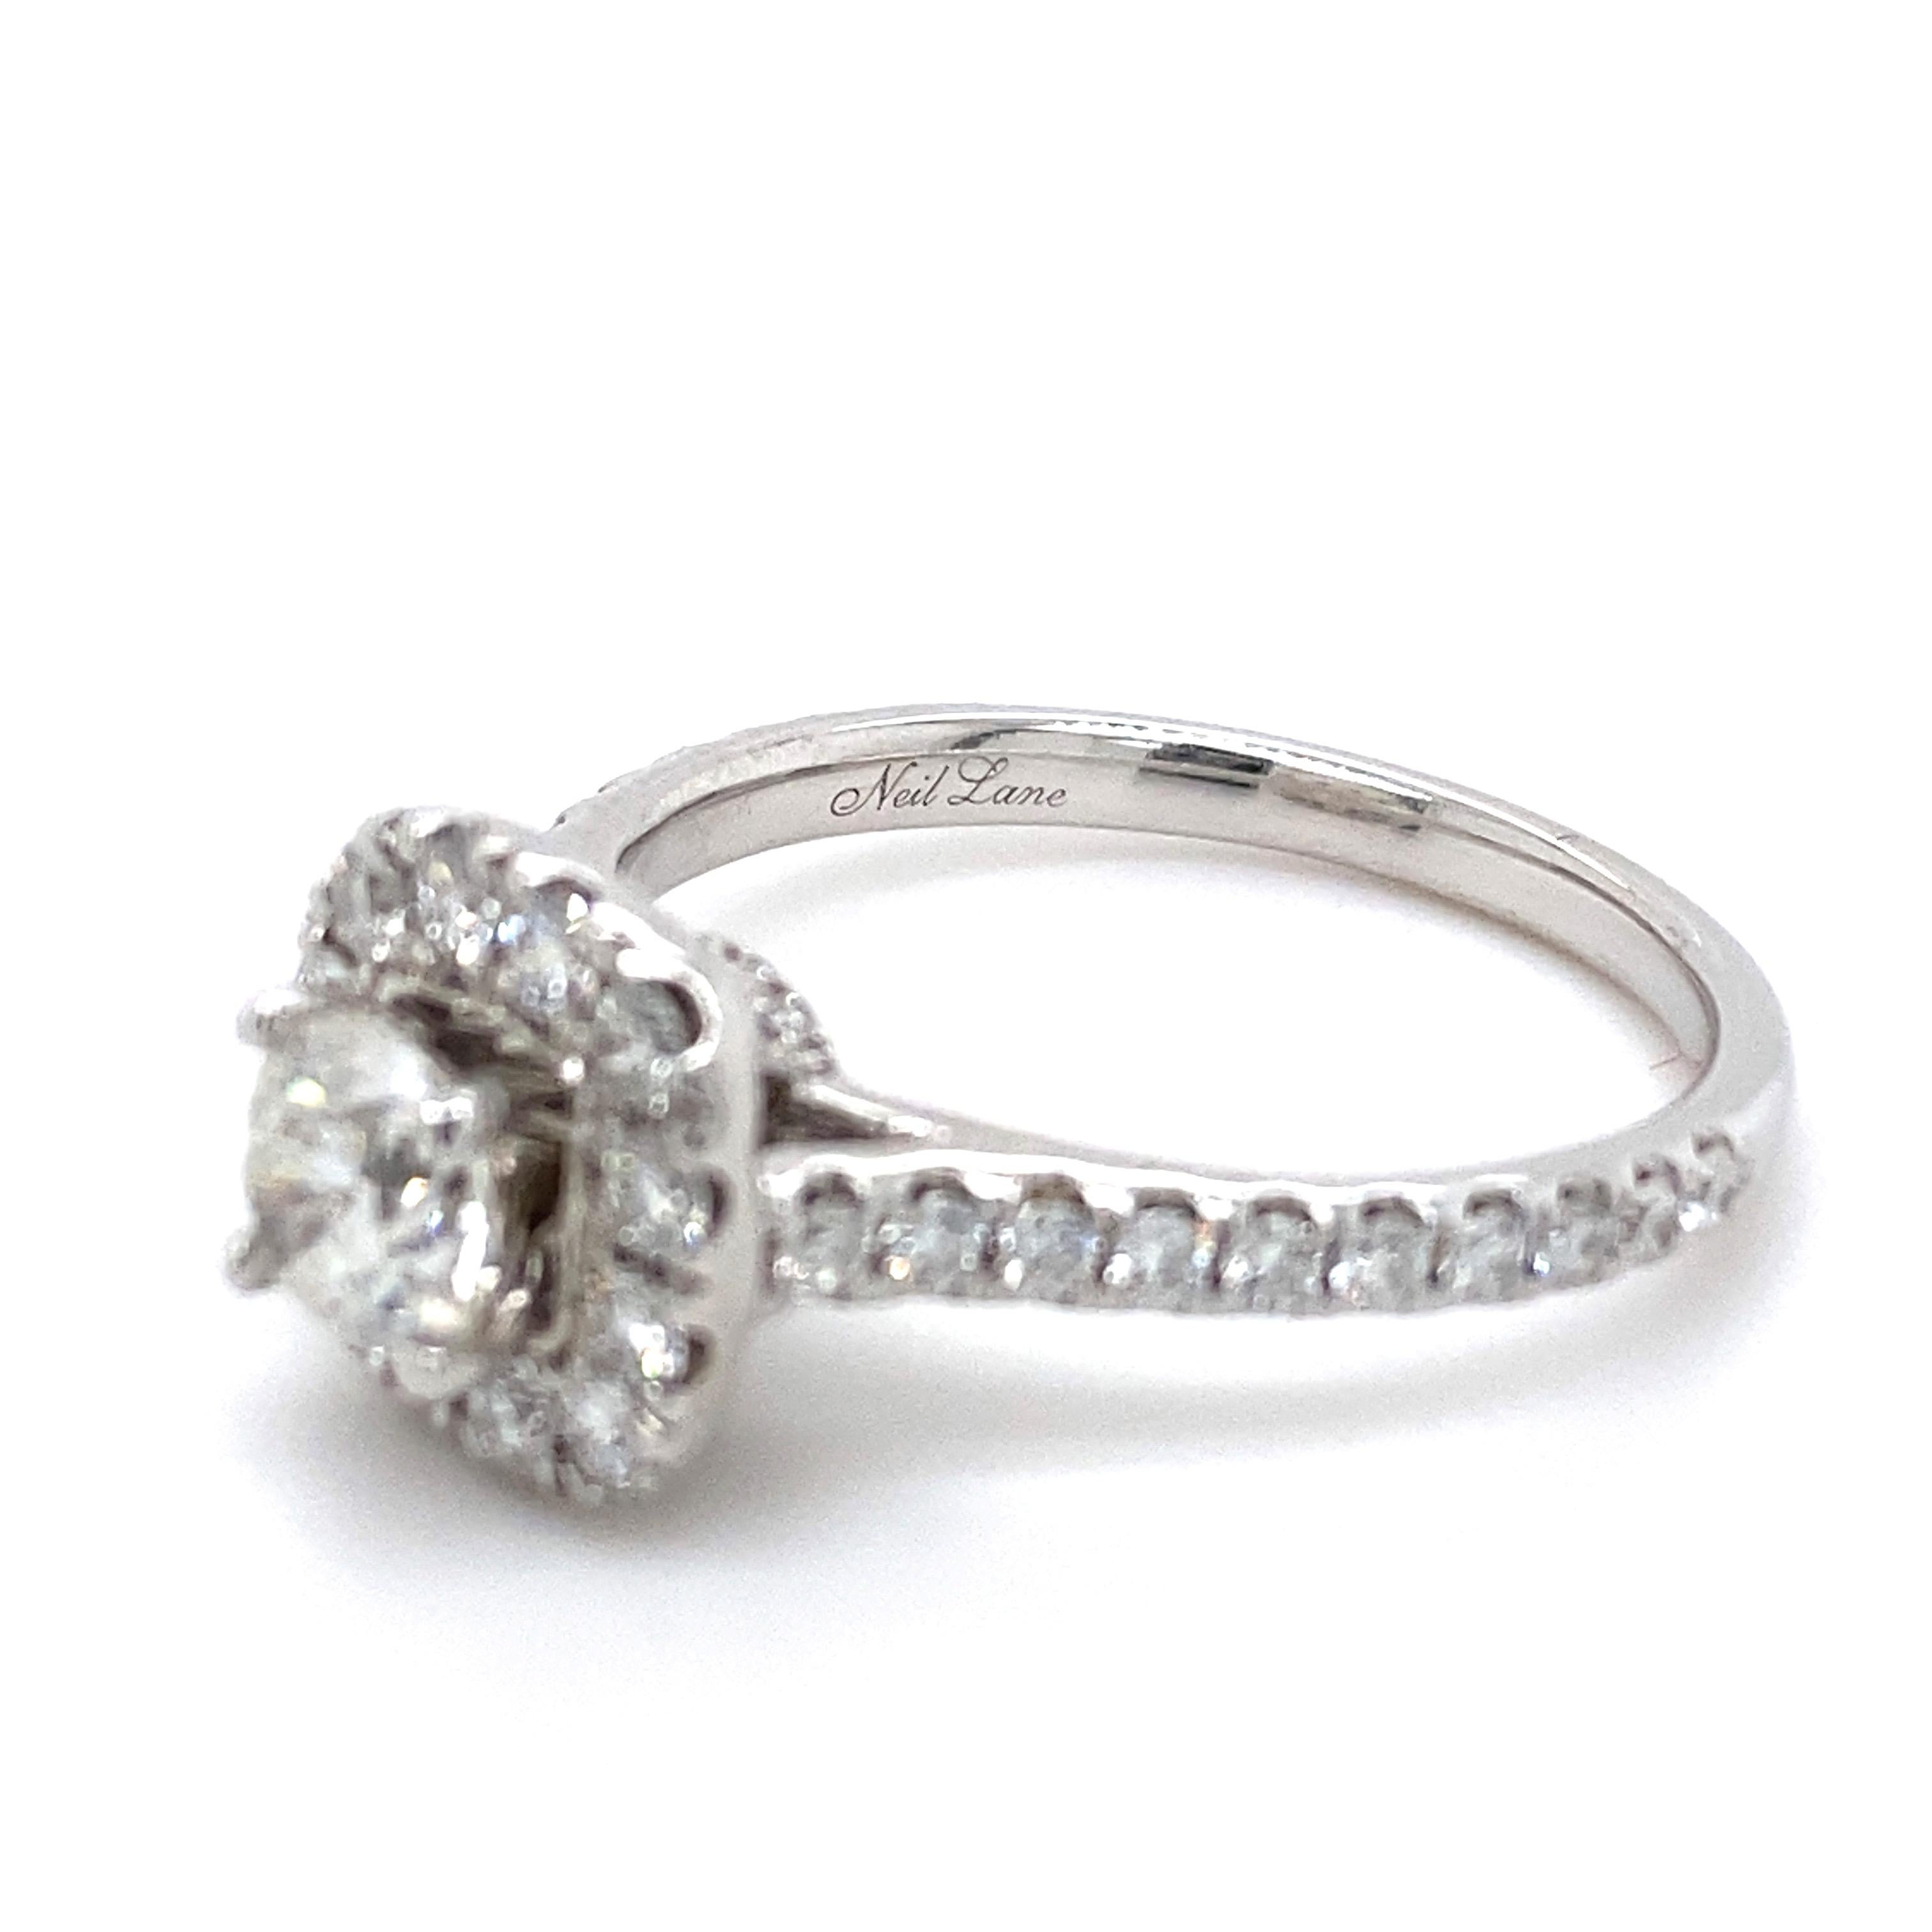 NEIL LANE Round Diamond Halo 1.27 tcw Engagement Ring in 14kt White Gold In Excellent Condition For Sale In San Diego, CA